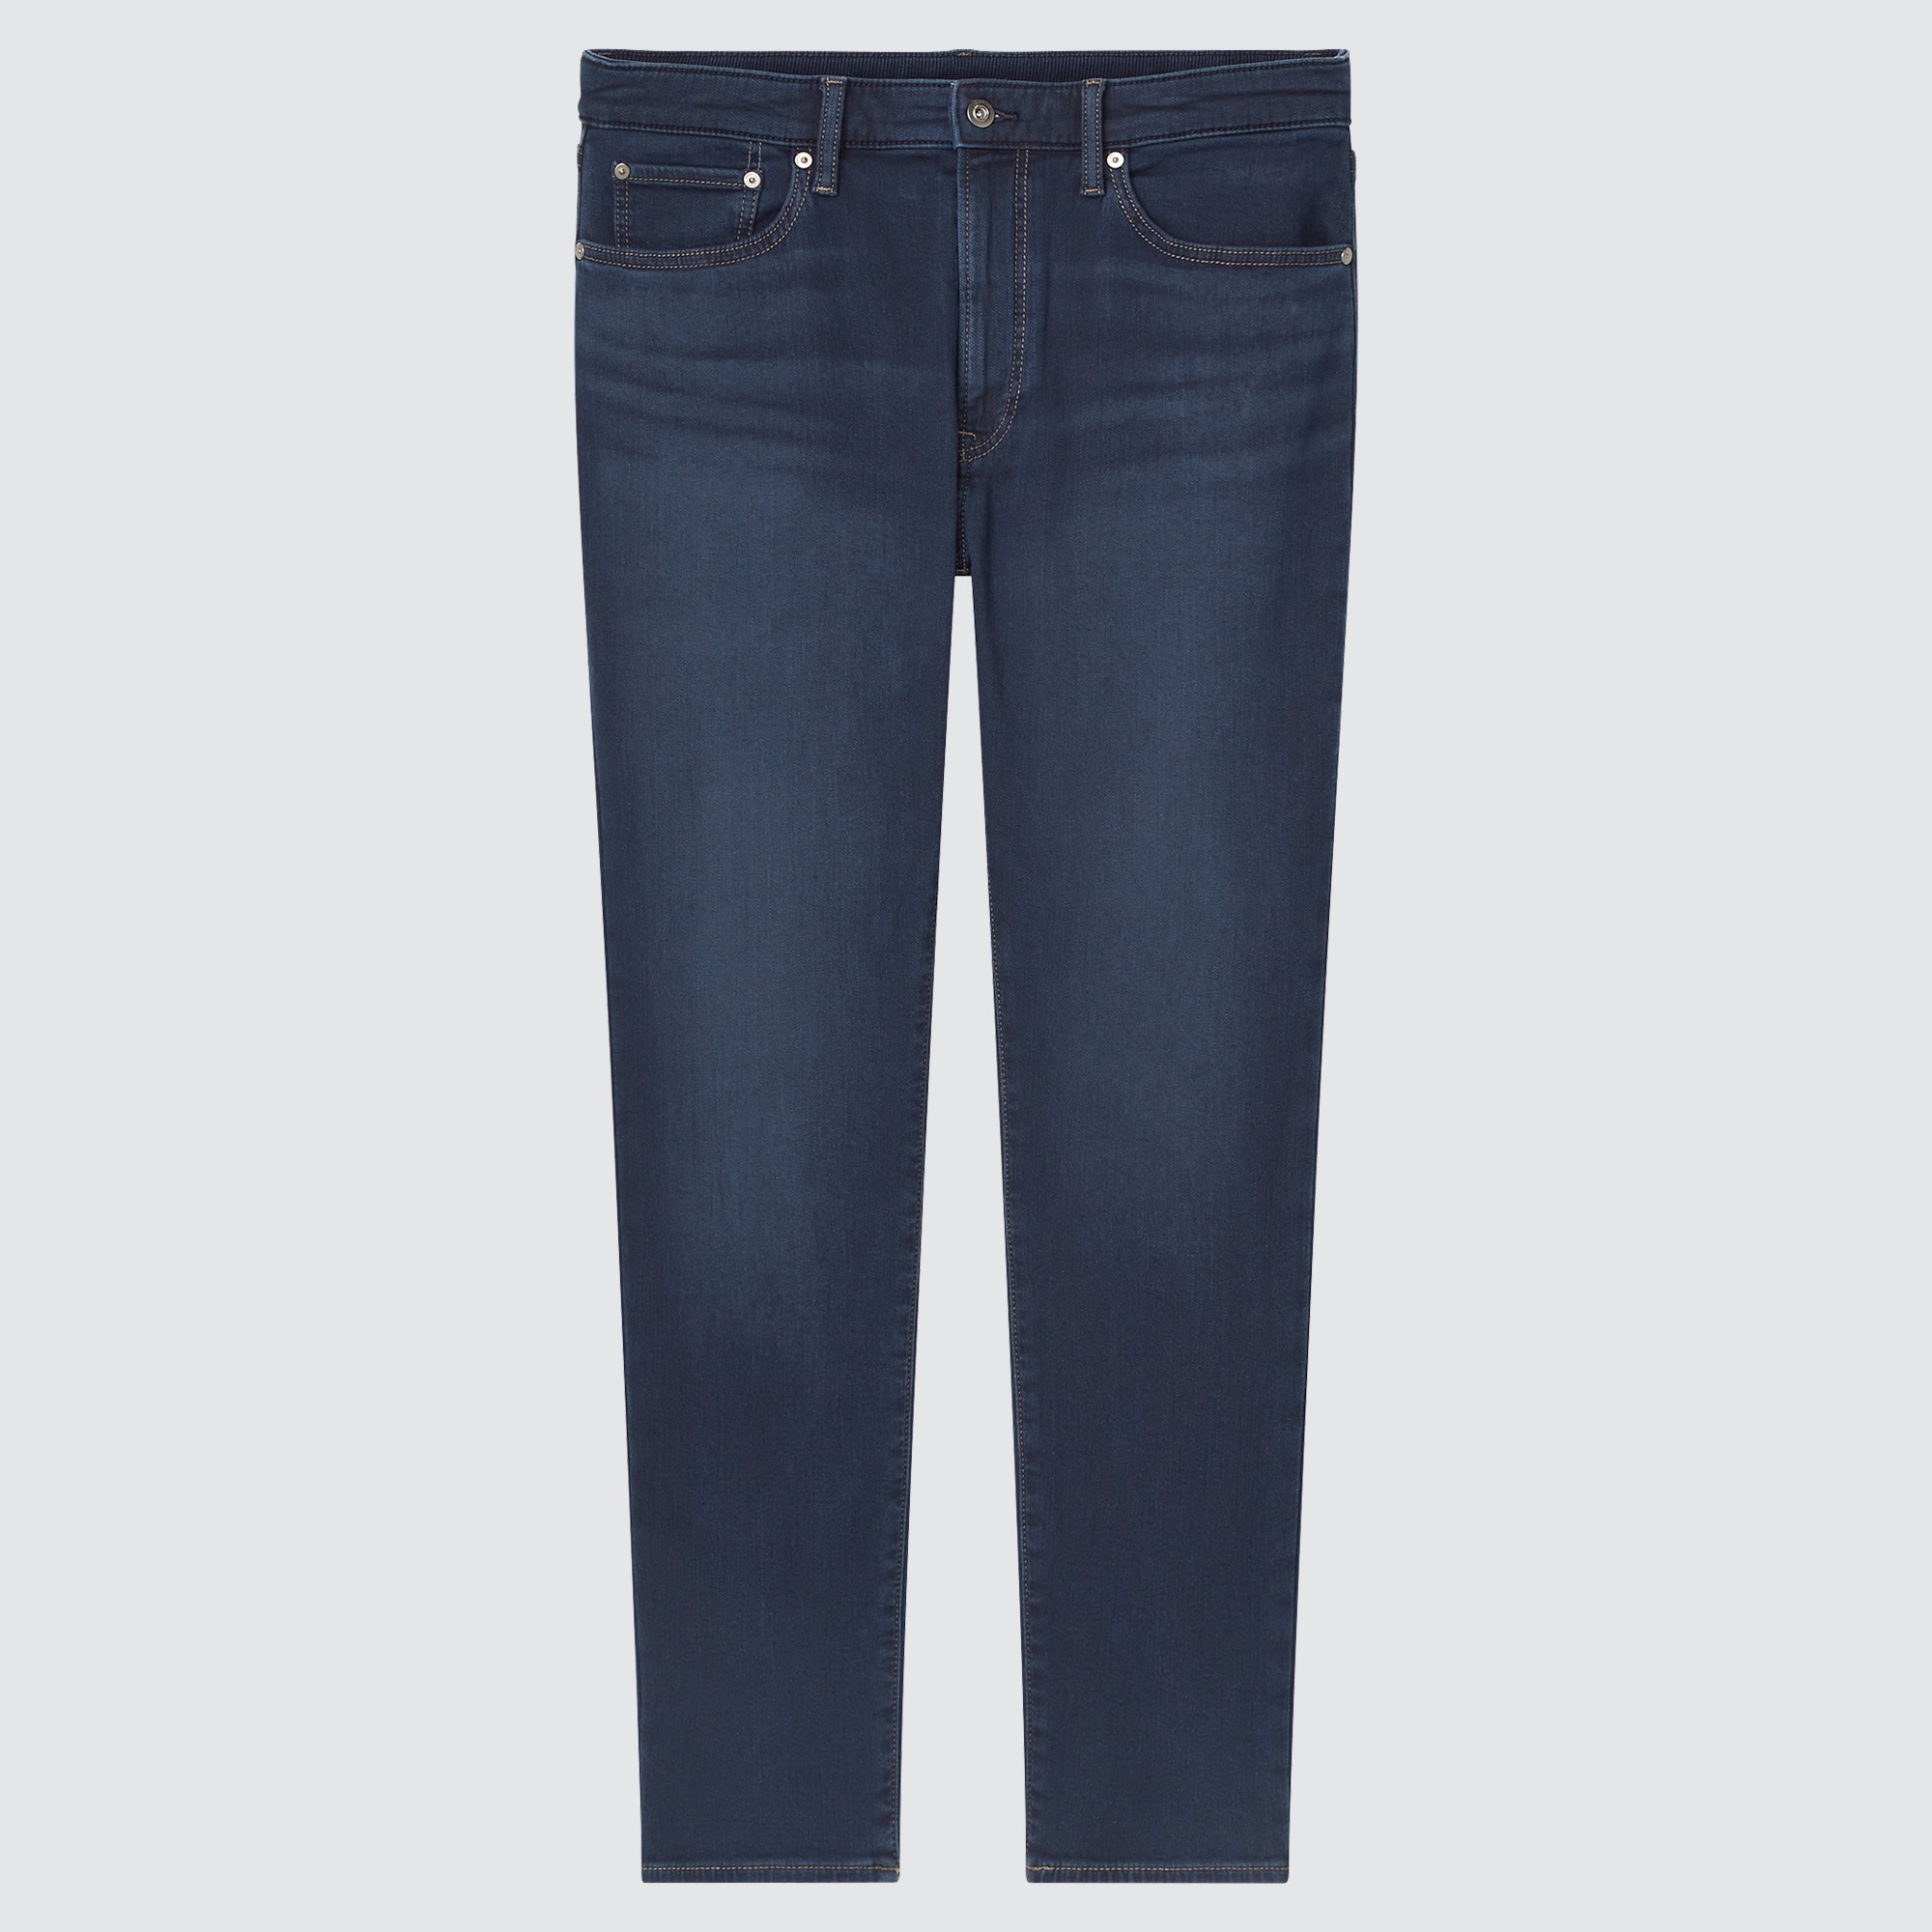 UNIQLO EZY Ultra Stretch Jeans (Tall) | StyleHint